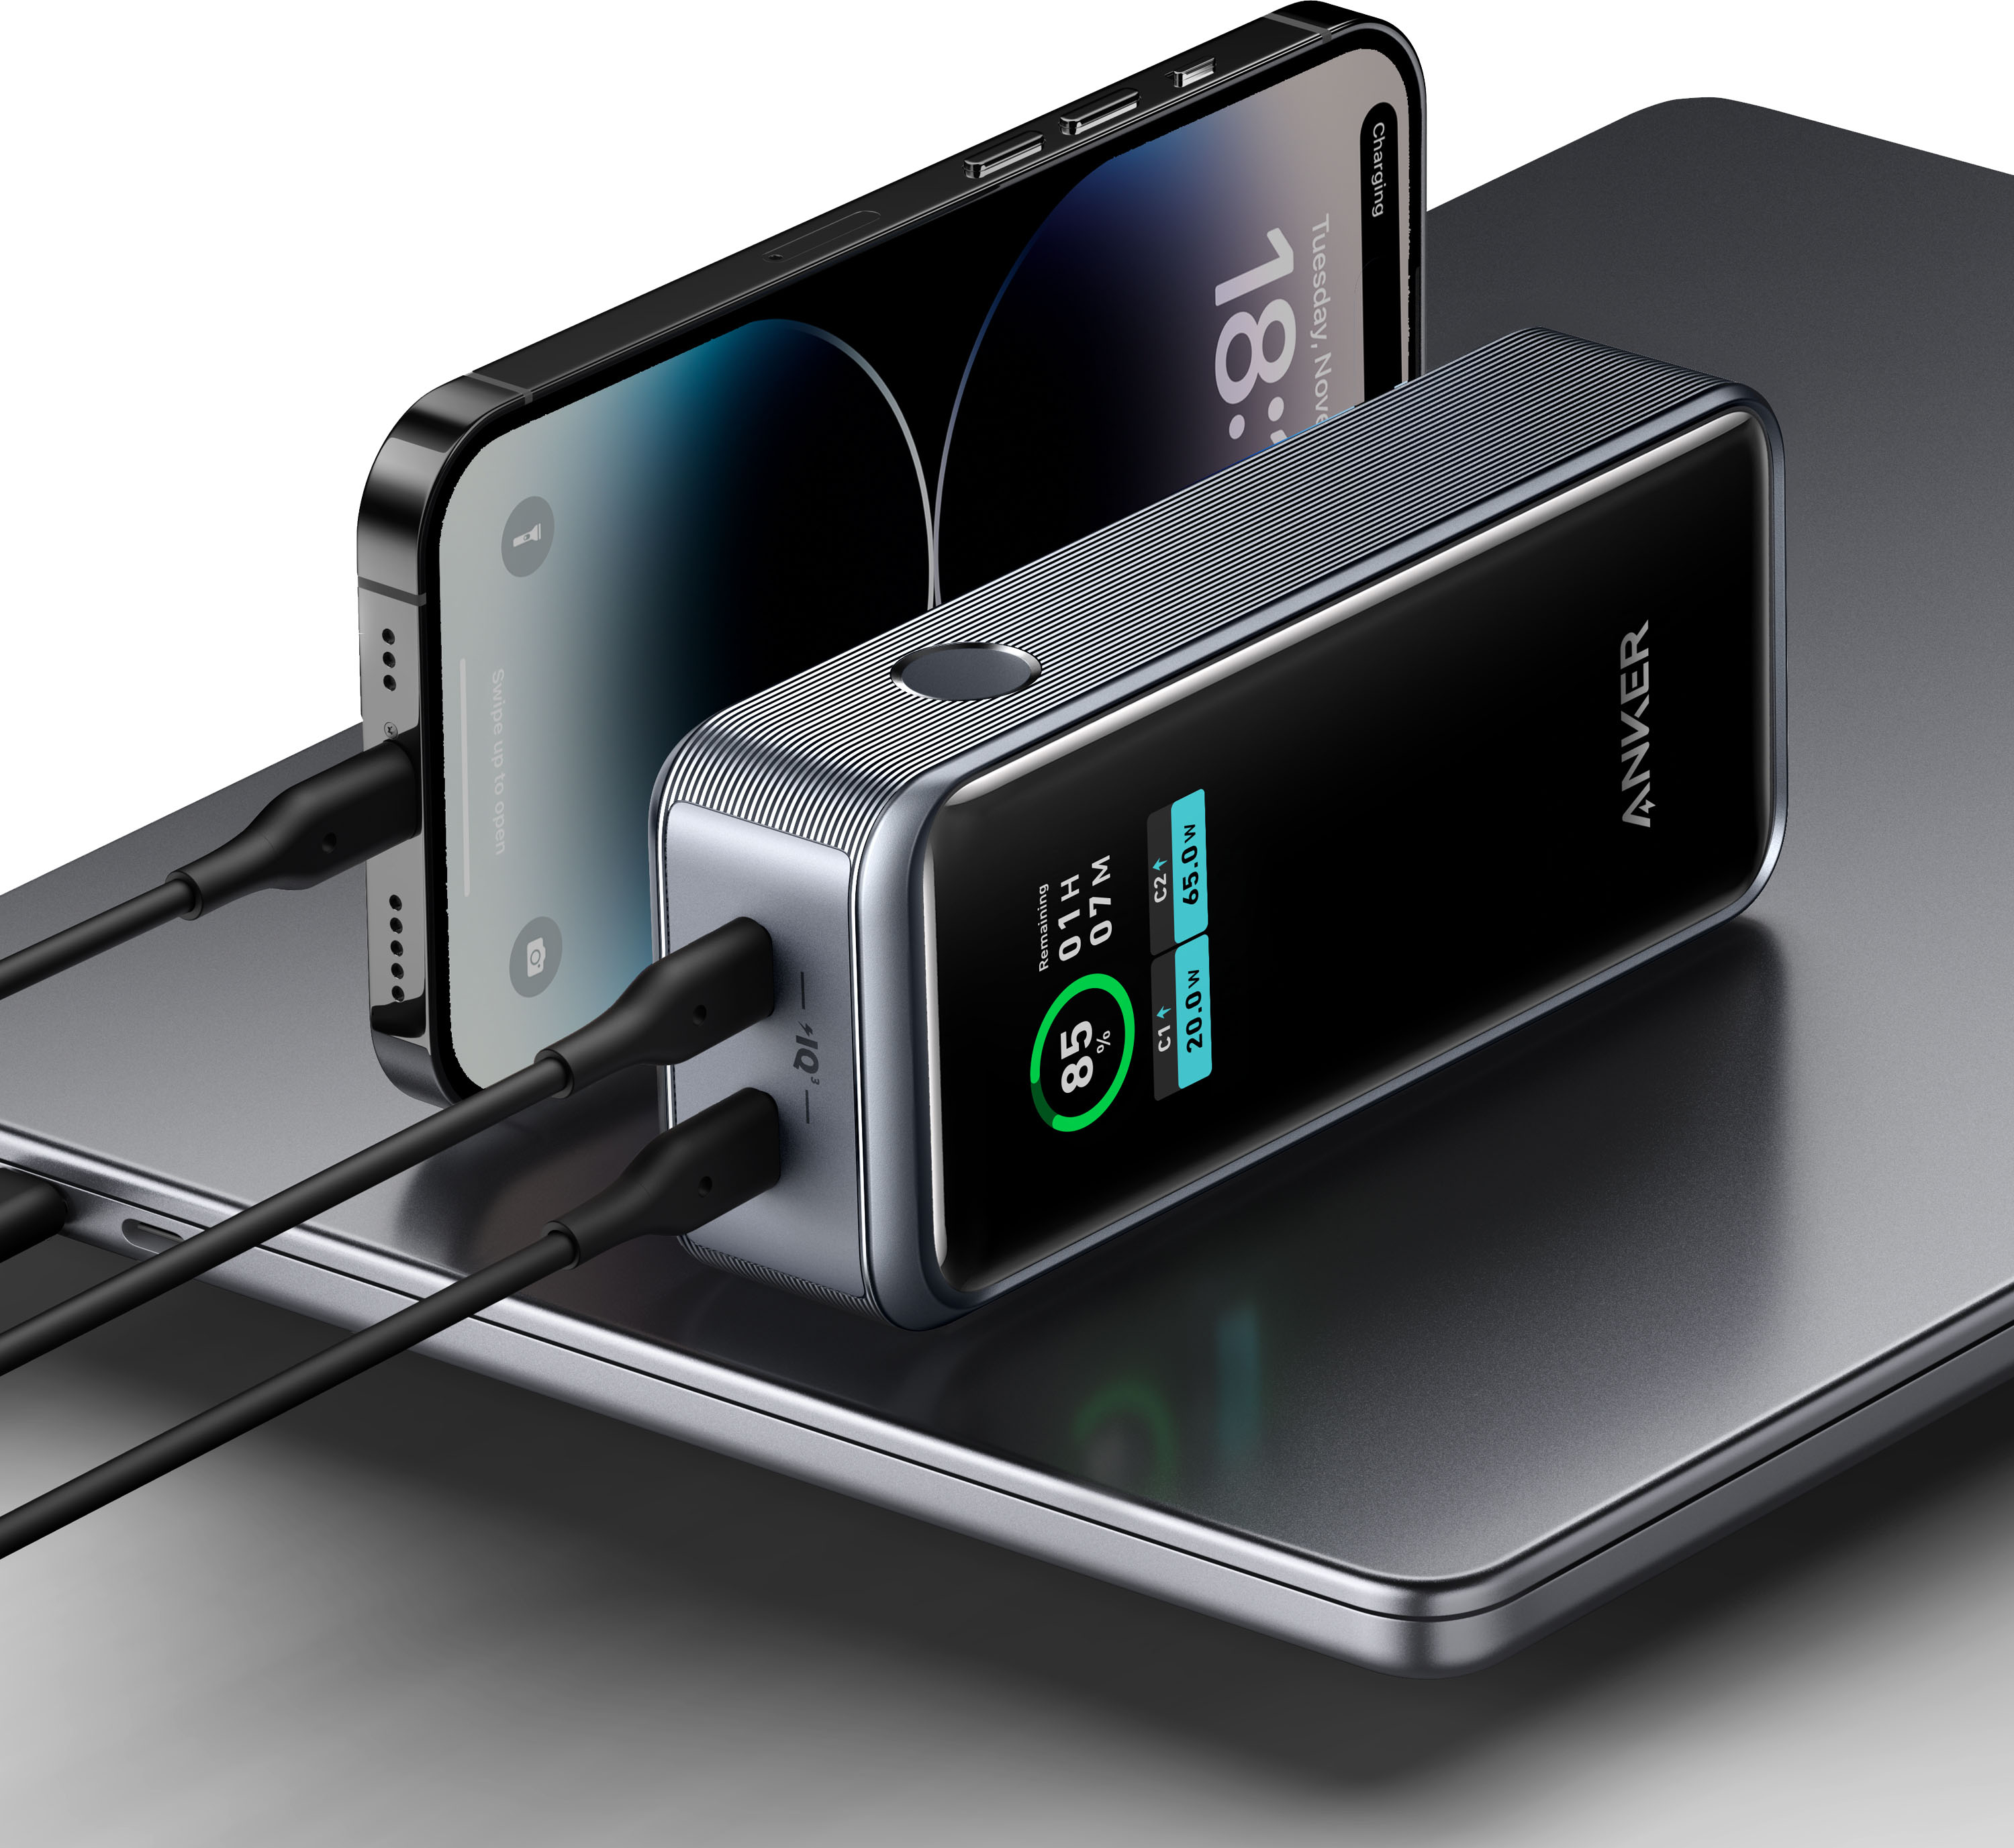 Anker 130W Power Bank: Ultimate 12000mAh Portable Charger